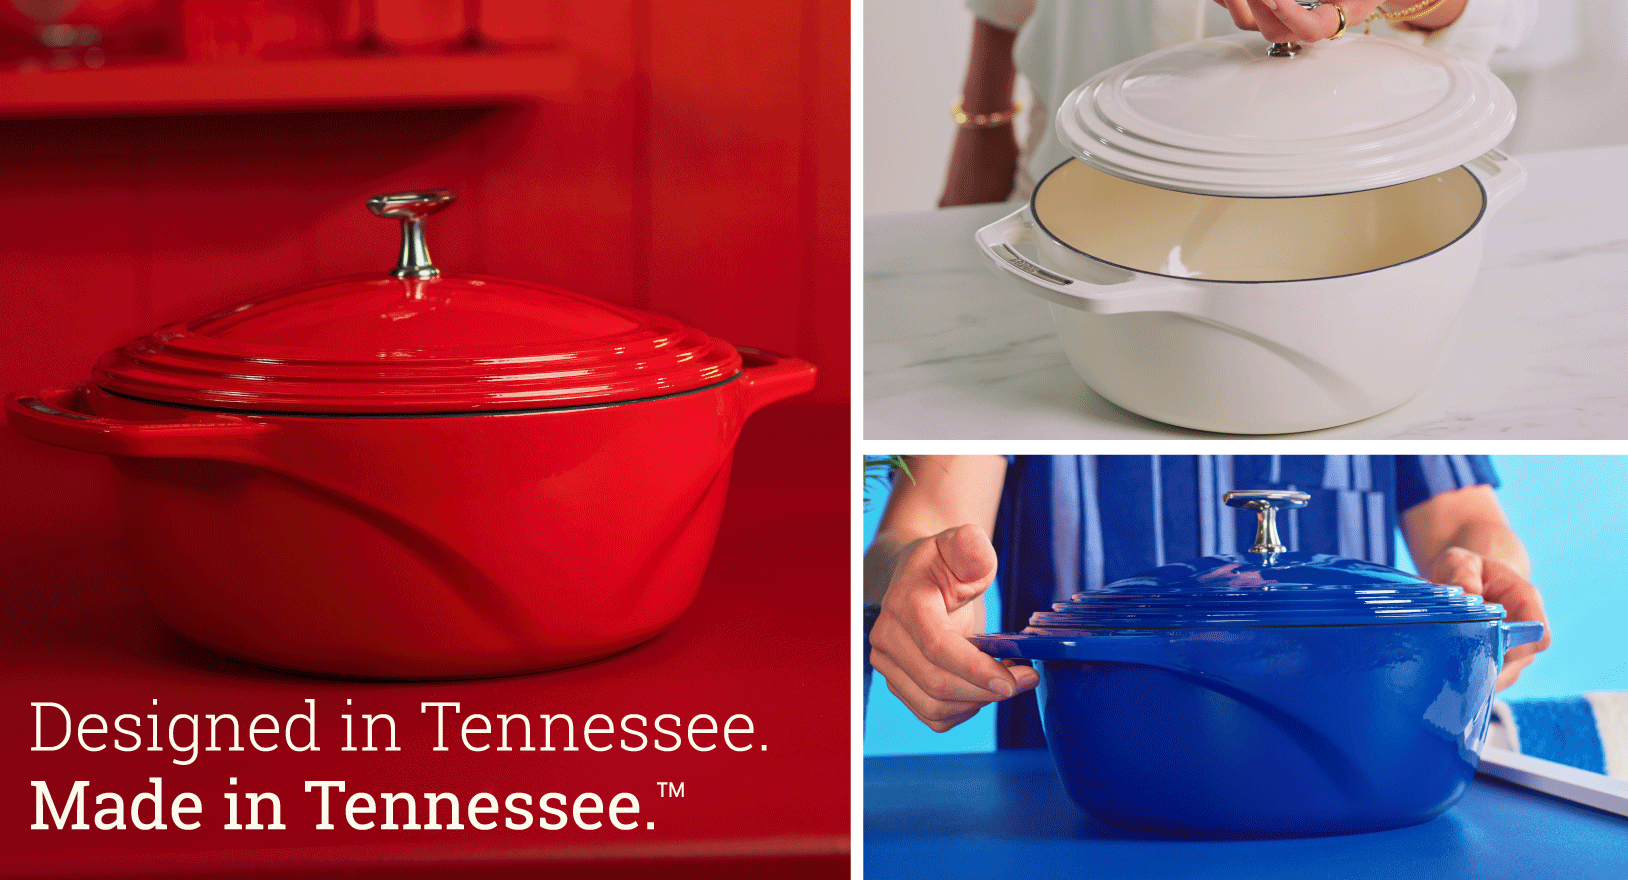 USA Enamel, Designed in Tennessee, Made in Tennessee